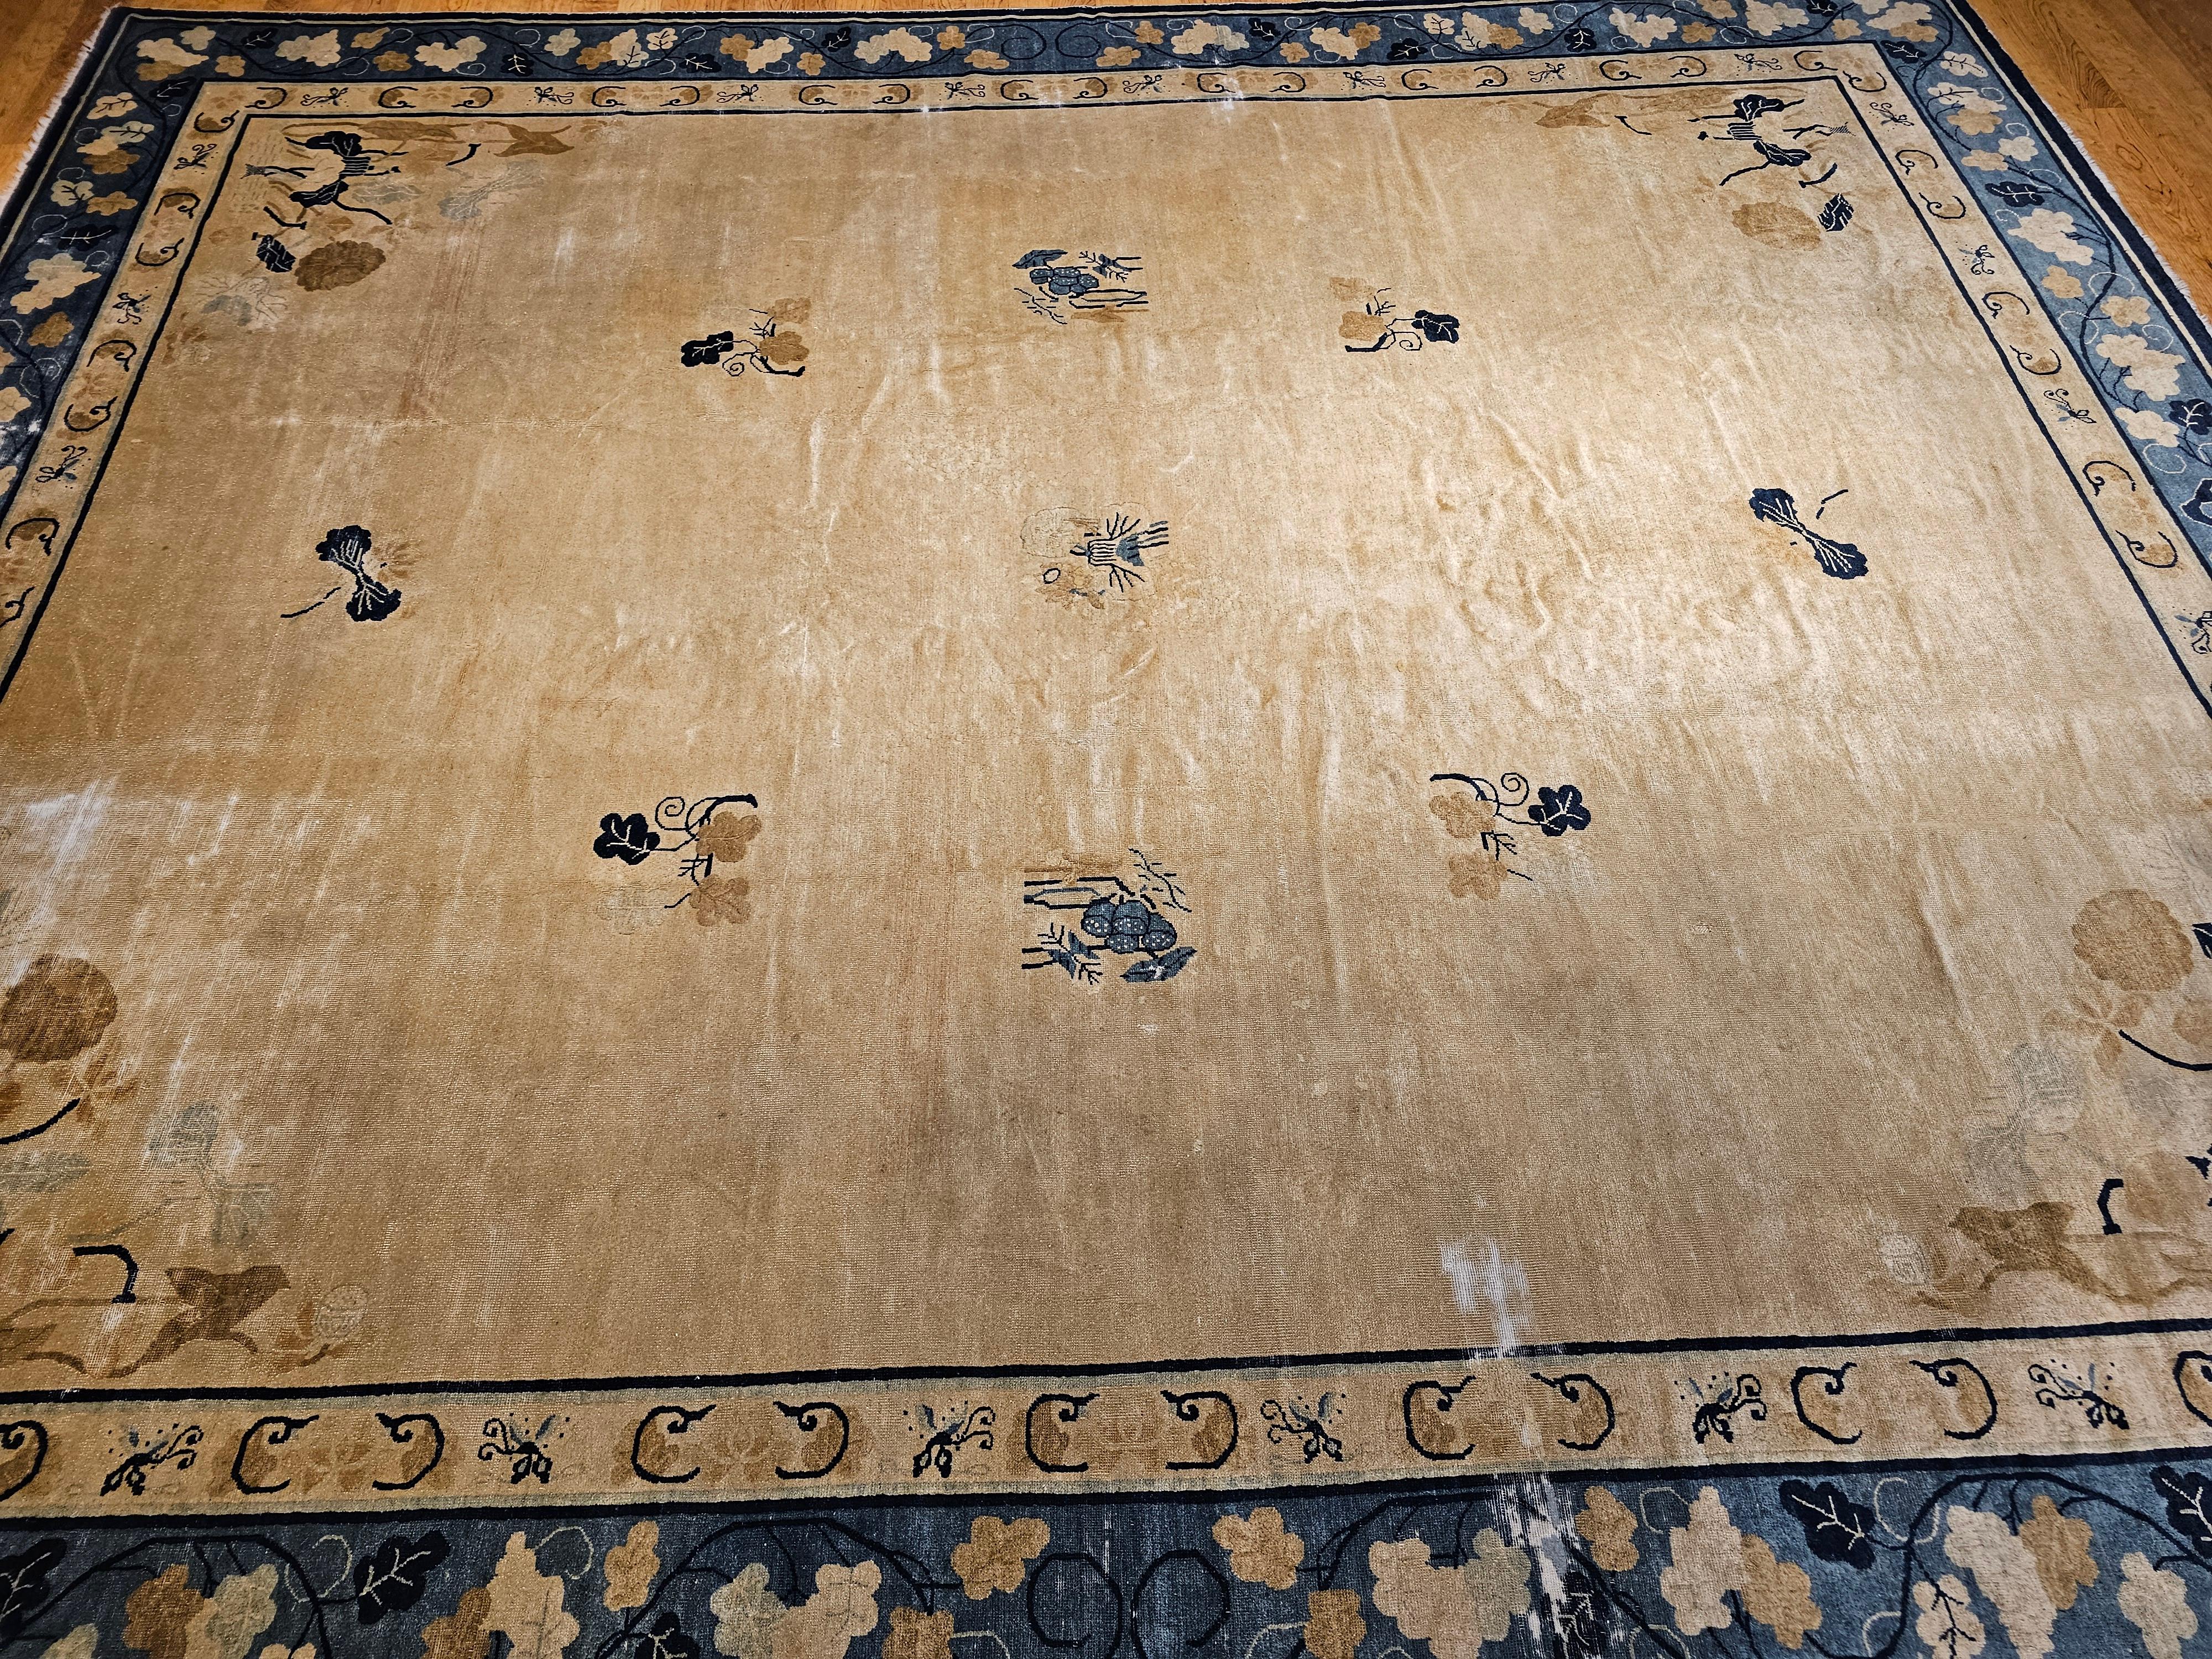 19th Century Oversized Chinese Peking Rug in Wheat, Navy, Brown, Green, Sky-Blue For Sale 11